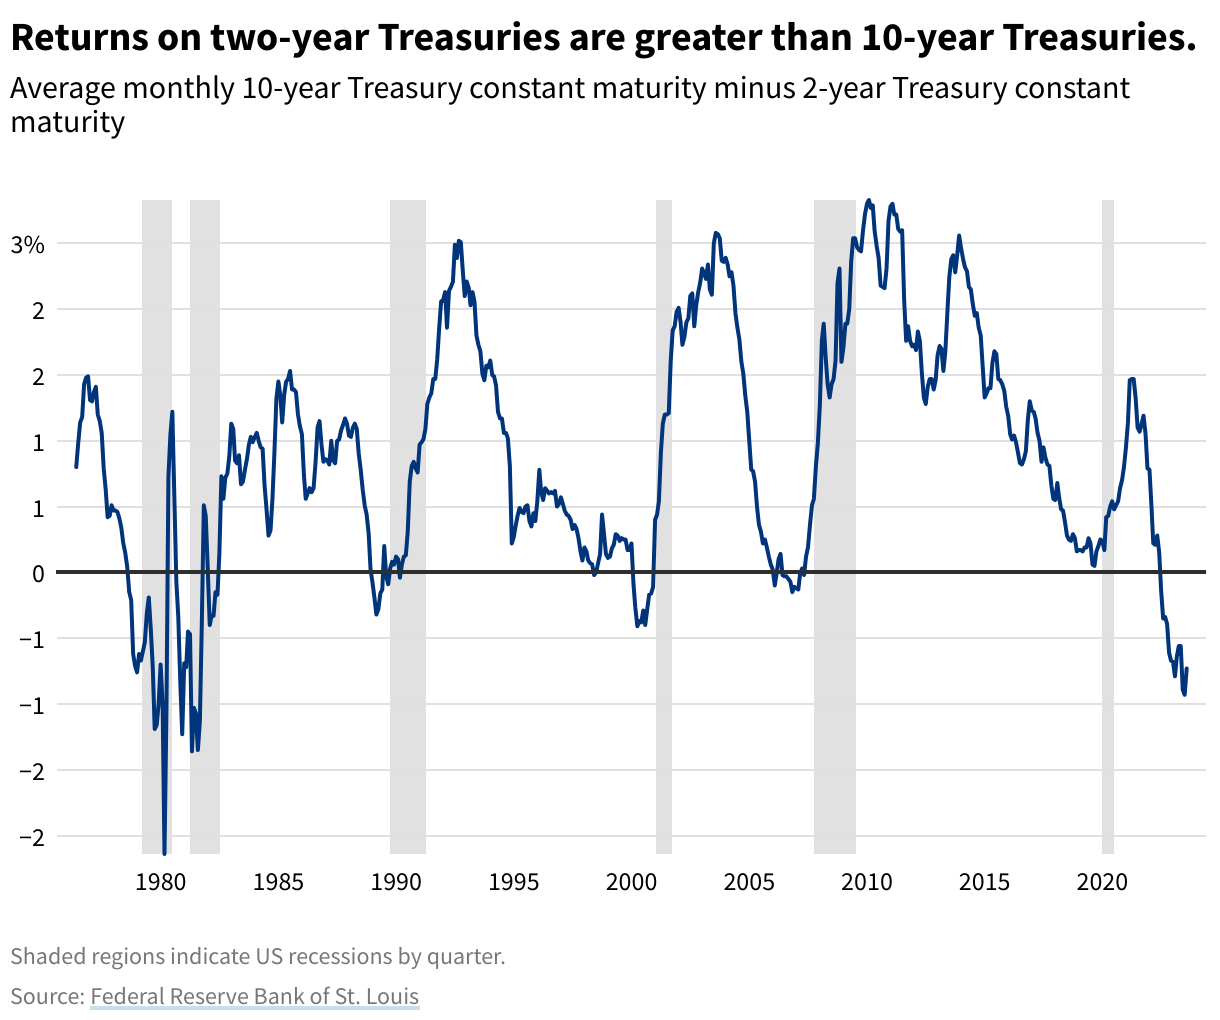 Line chart showing average monthly 10-year treasury constant maturity minus 2-year treasury constant maturity.